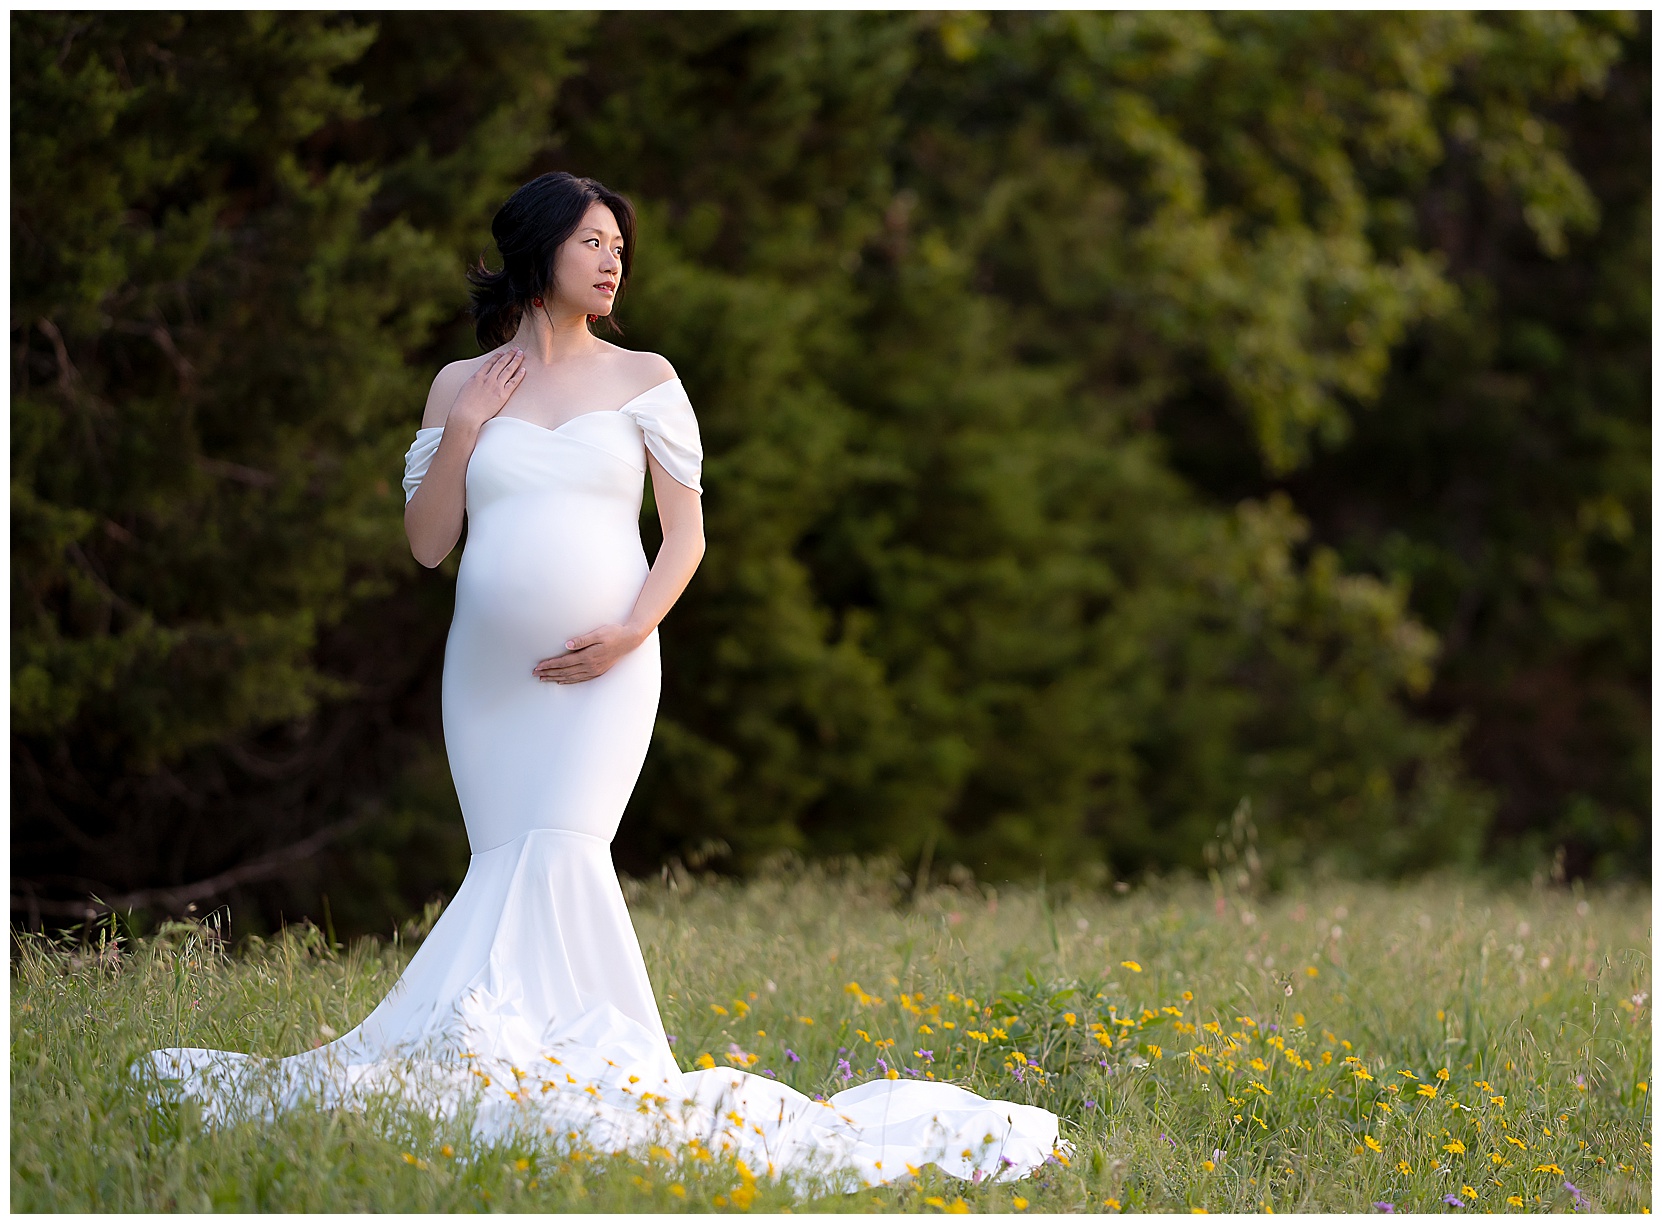 Brushy creek maternity photo featuring a woman in a white gown standing in a field of wildflowers